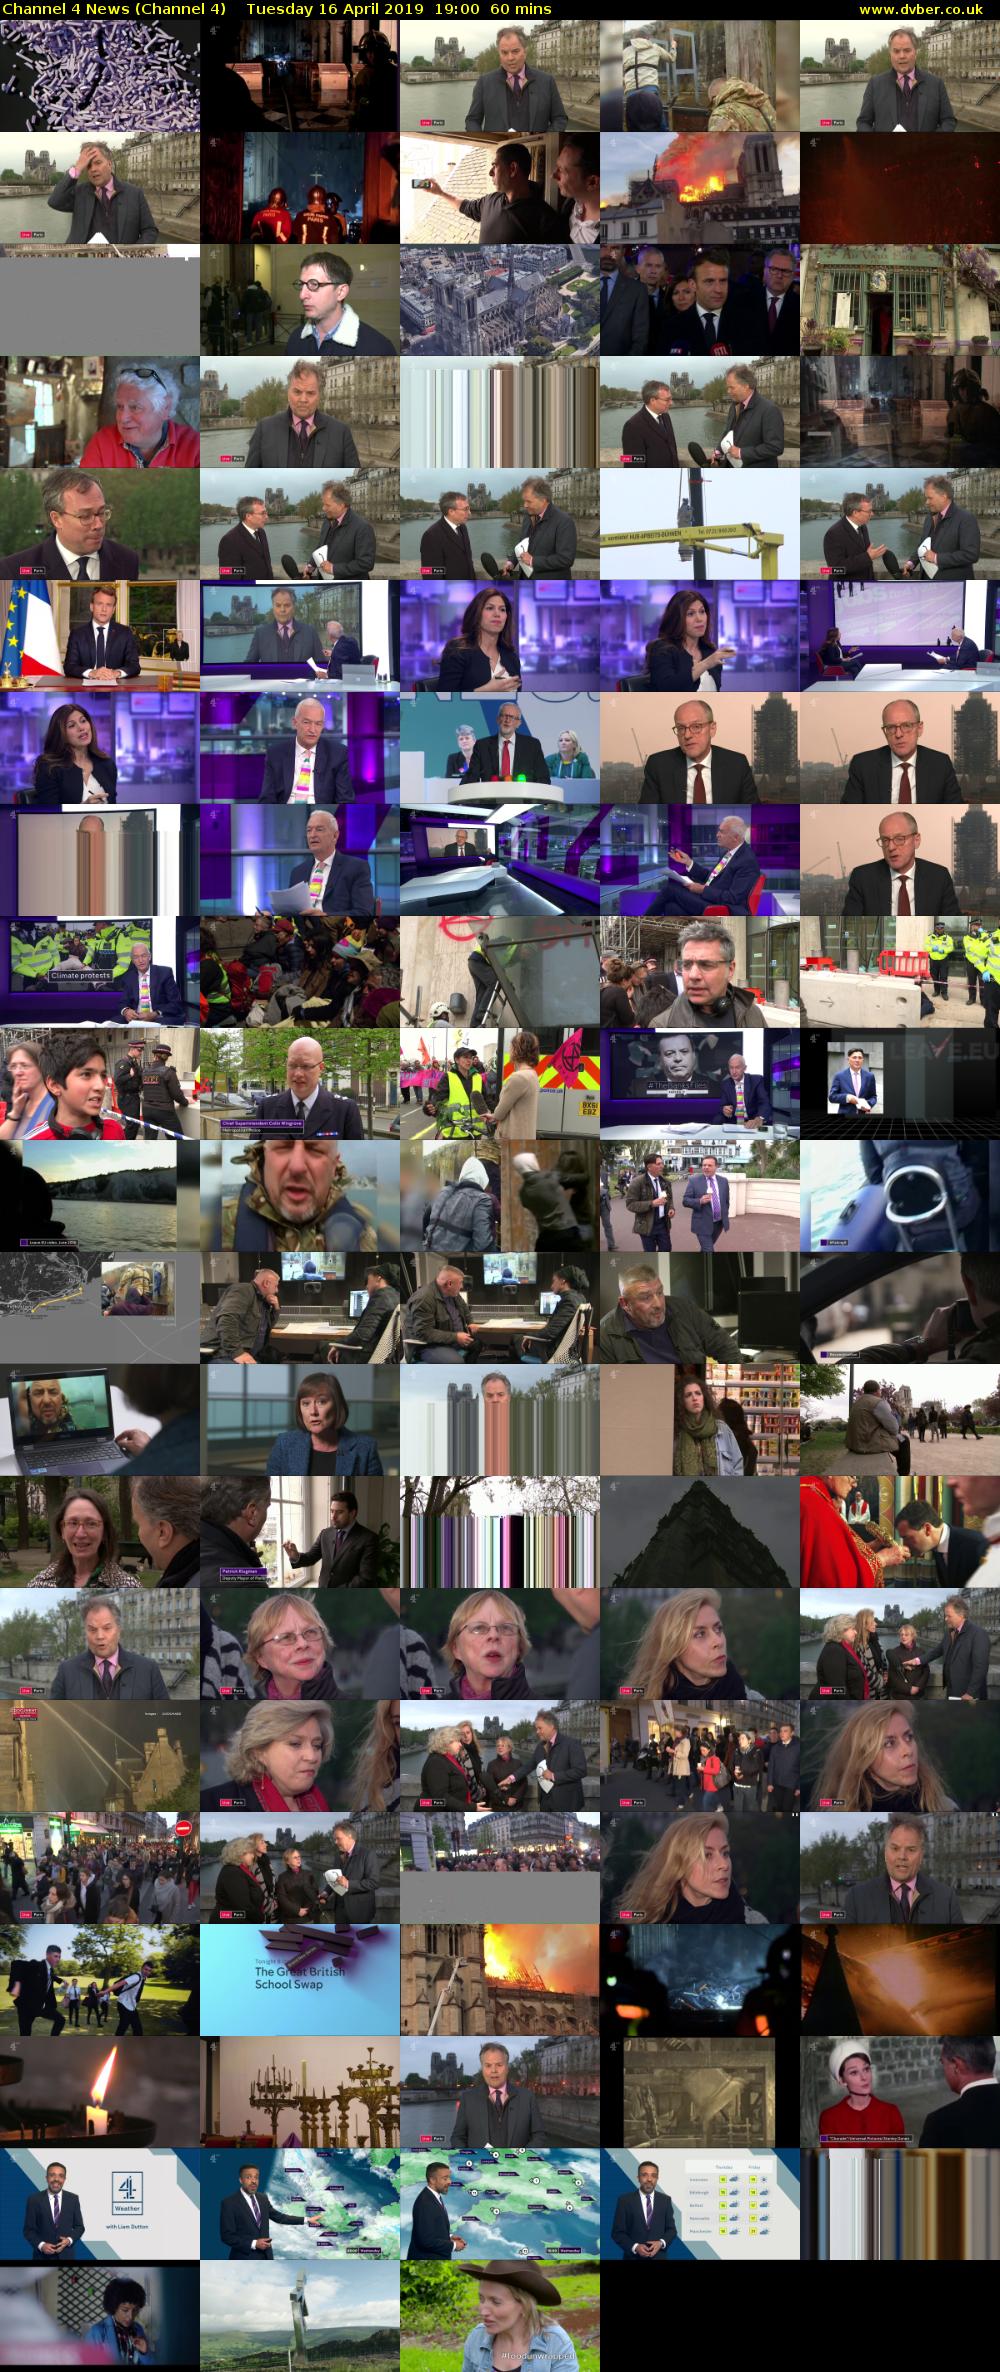 Channel 4 News (Channel 4) Tuesday 16 April 2019 19:00 - 20:00